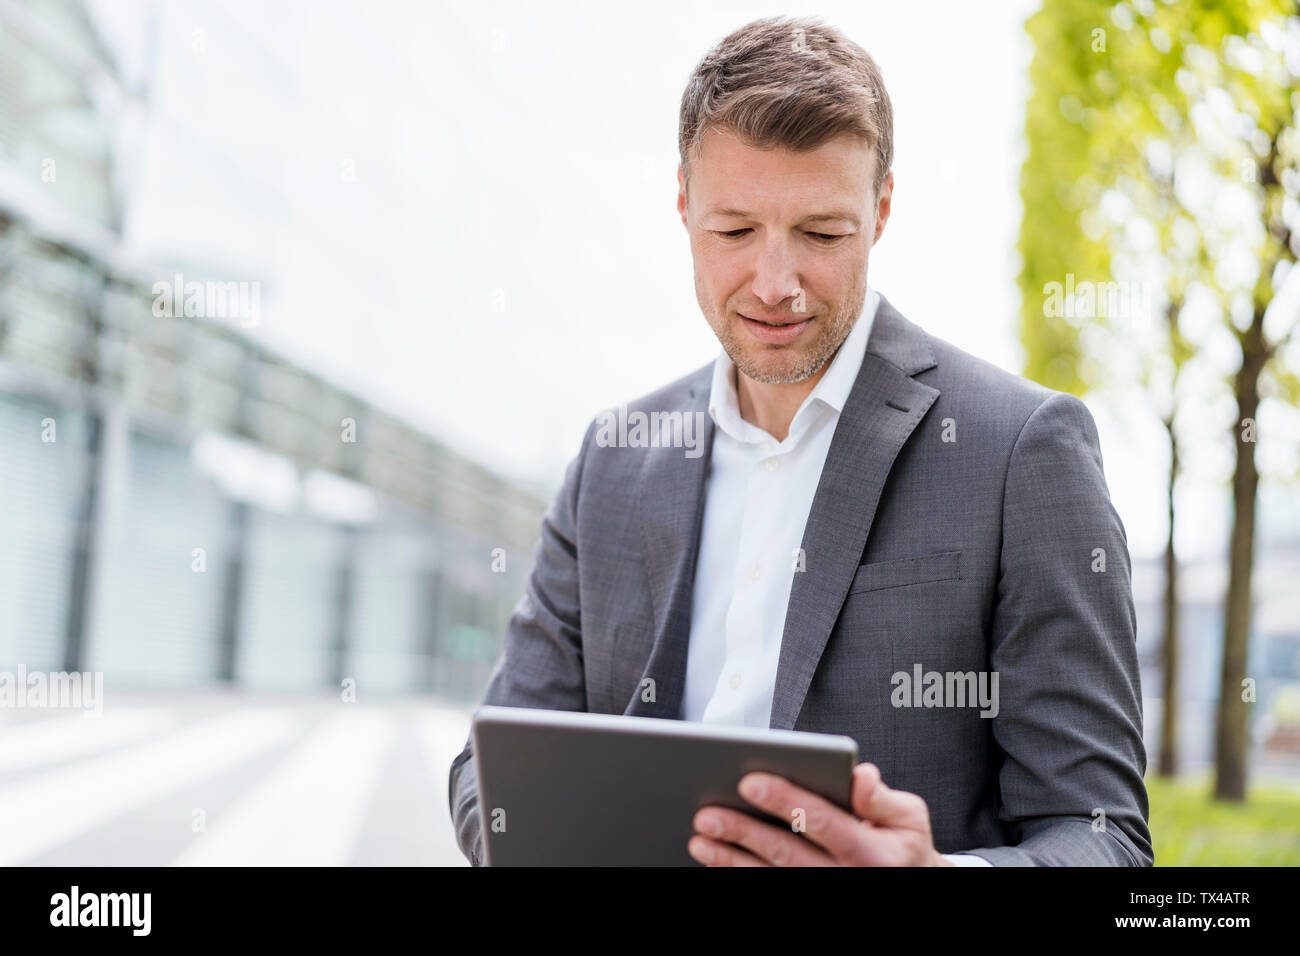 Businessman using tablet outside in the city Stock Photo